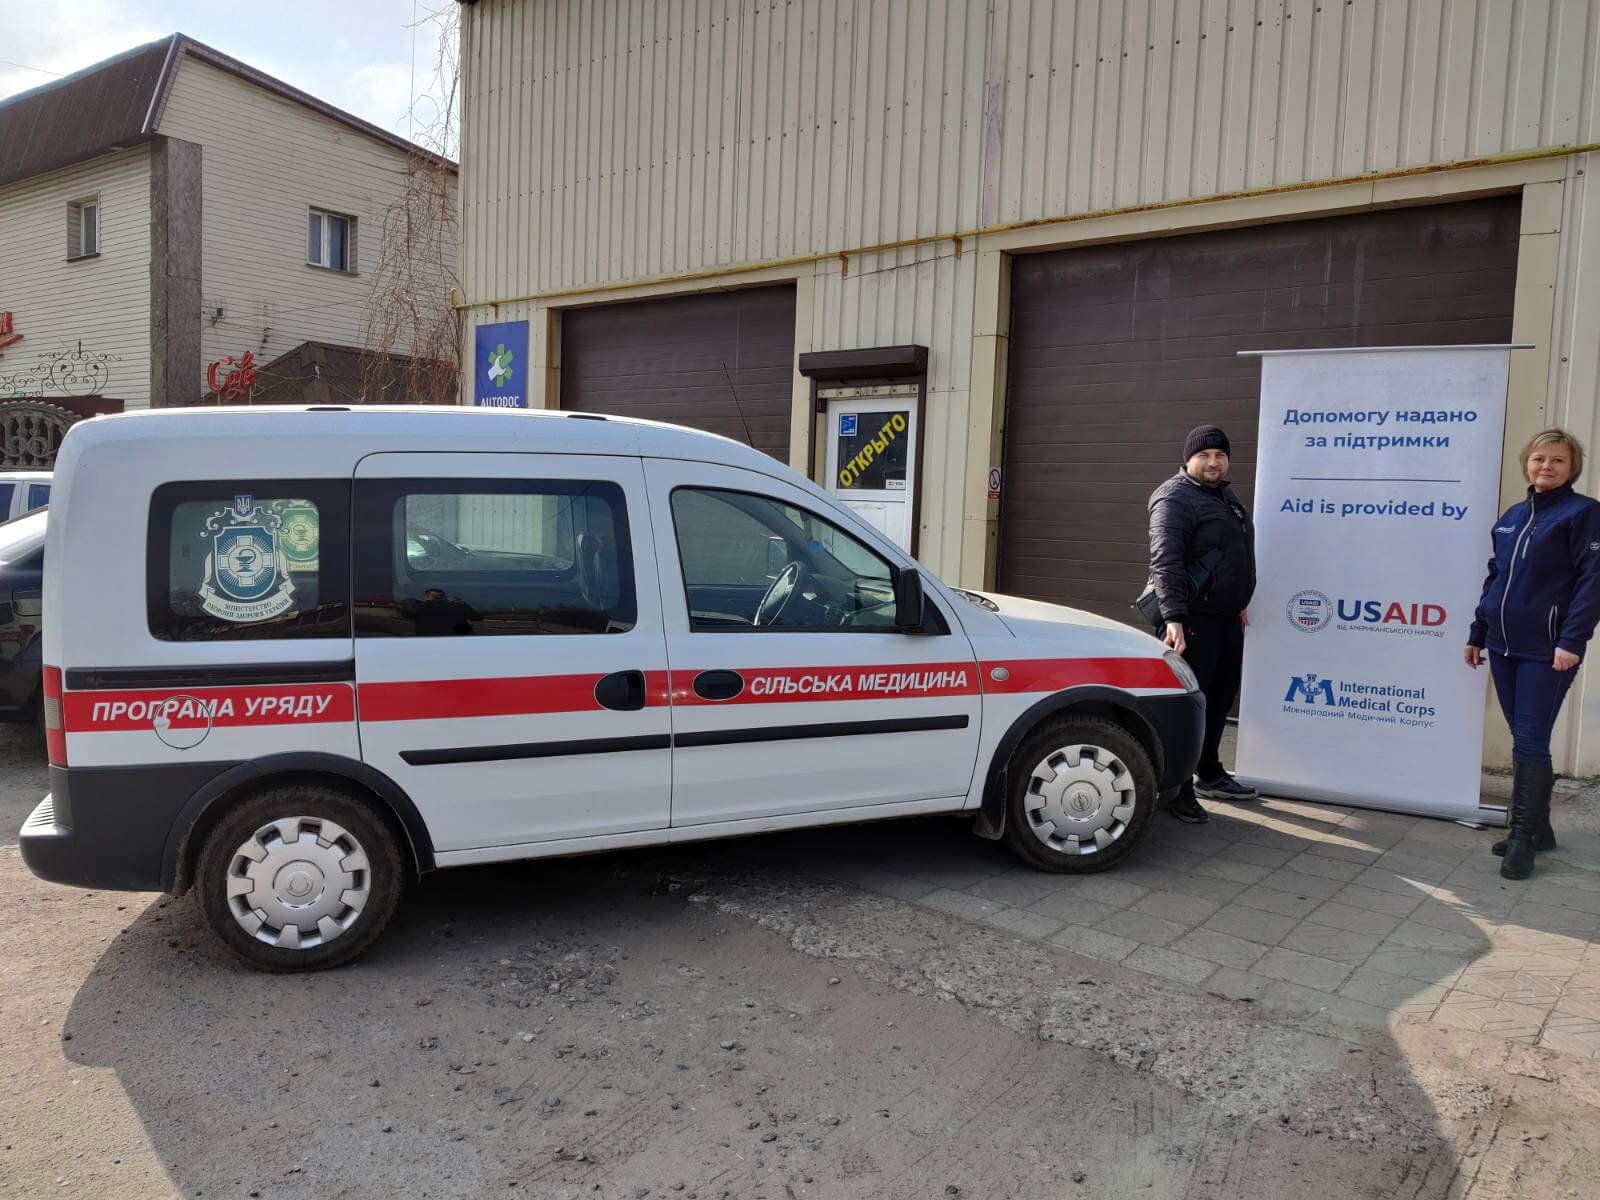 International Medical Corps staff stand next to one of the repaired ambulances from the Mykolaiv Regional Center for Medical Aid and Disaster Medicine.